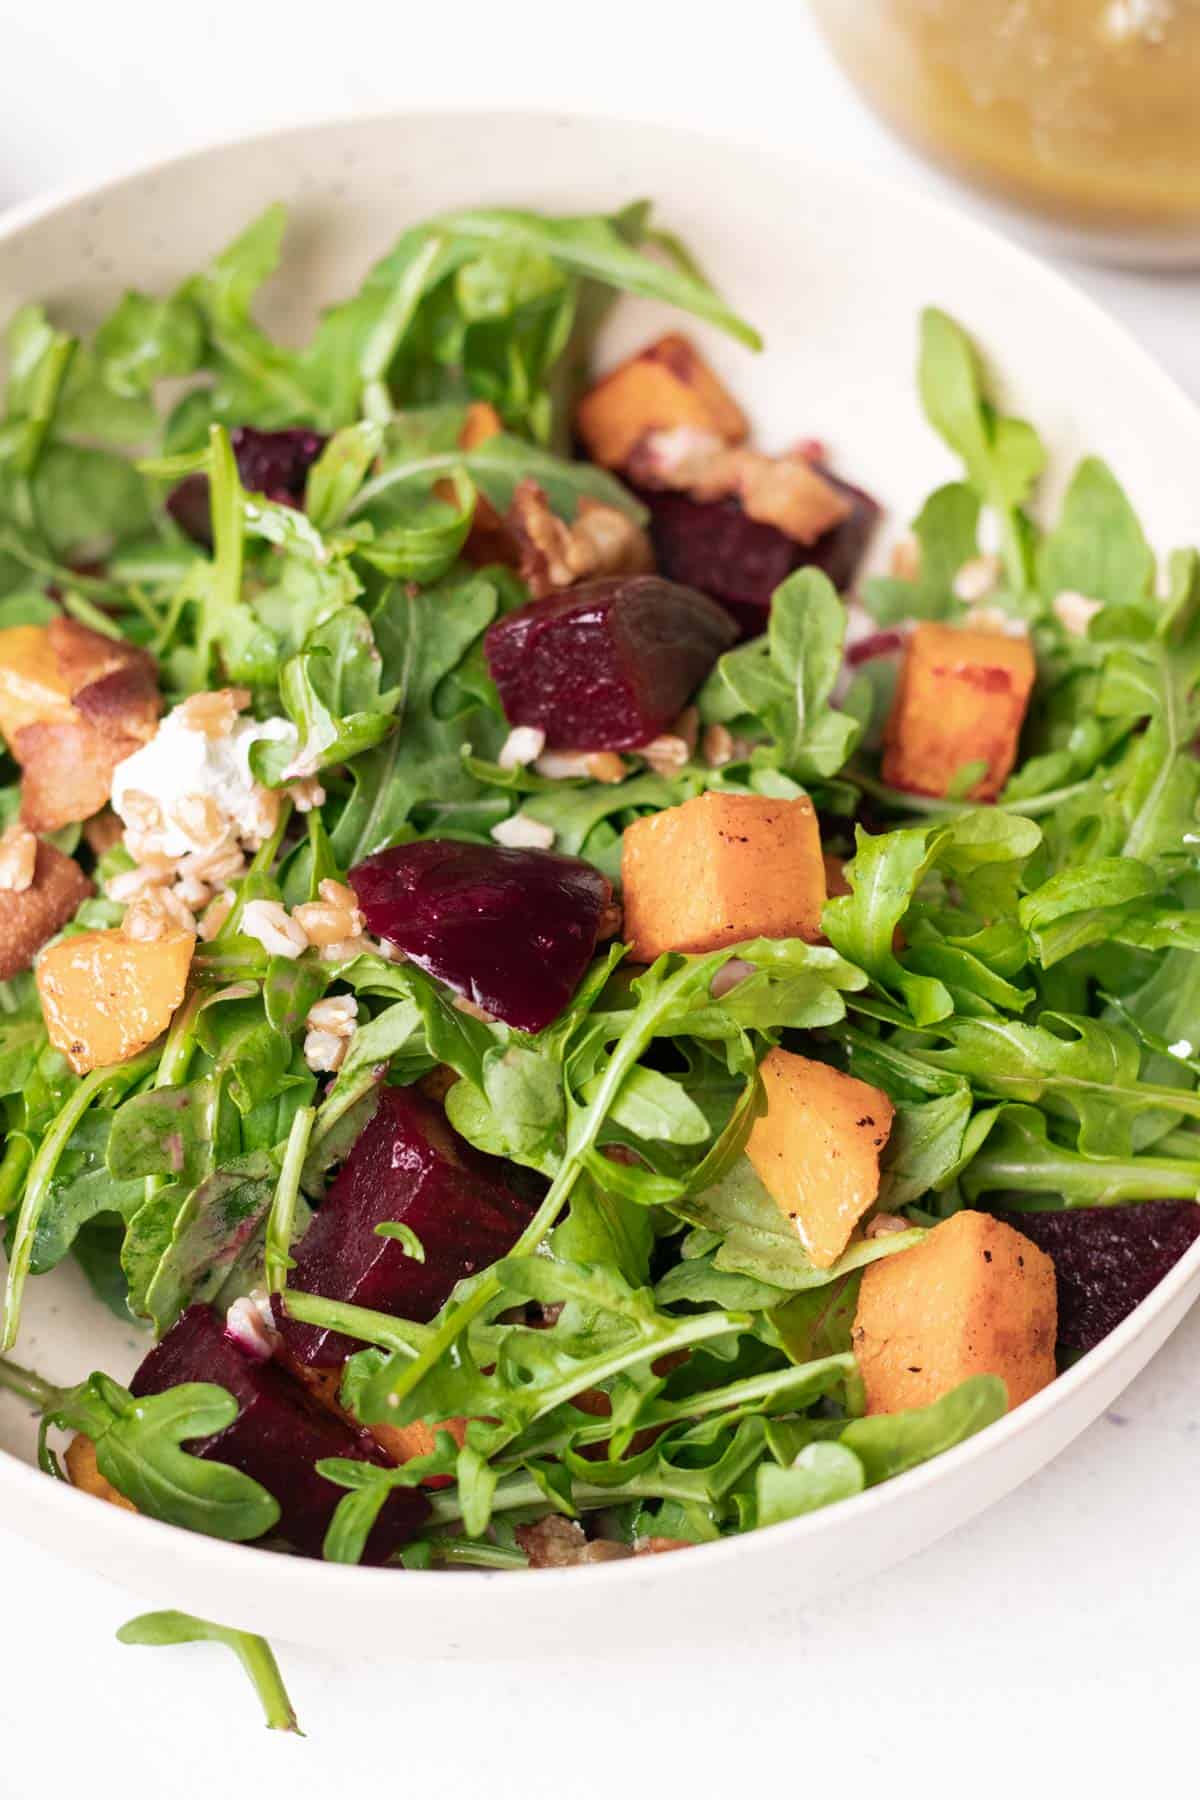 Arugula salad with beets, and butternut squash in a round salad bowl.